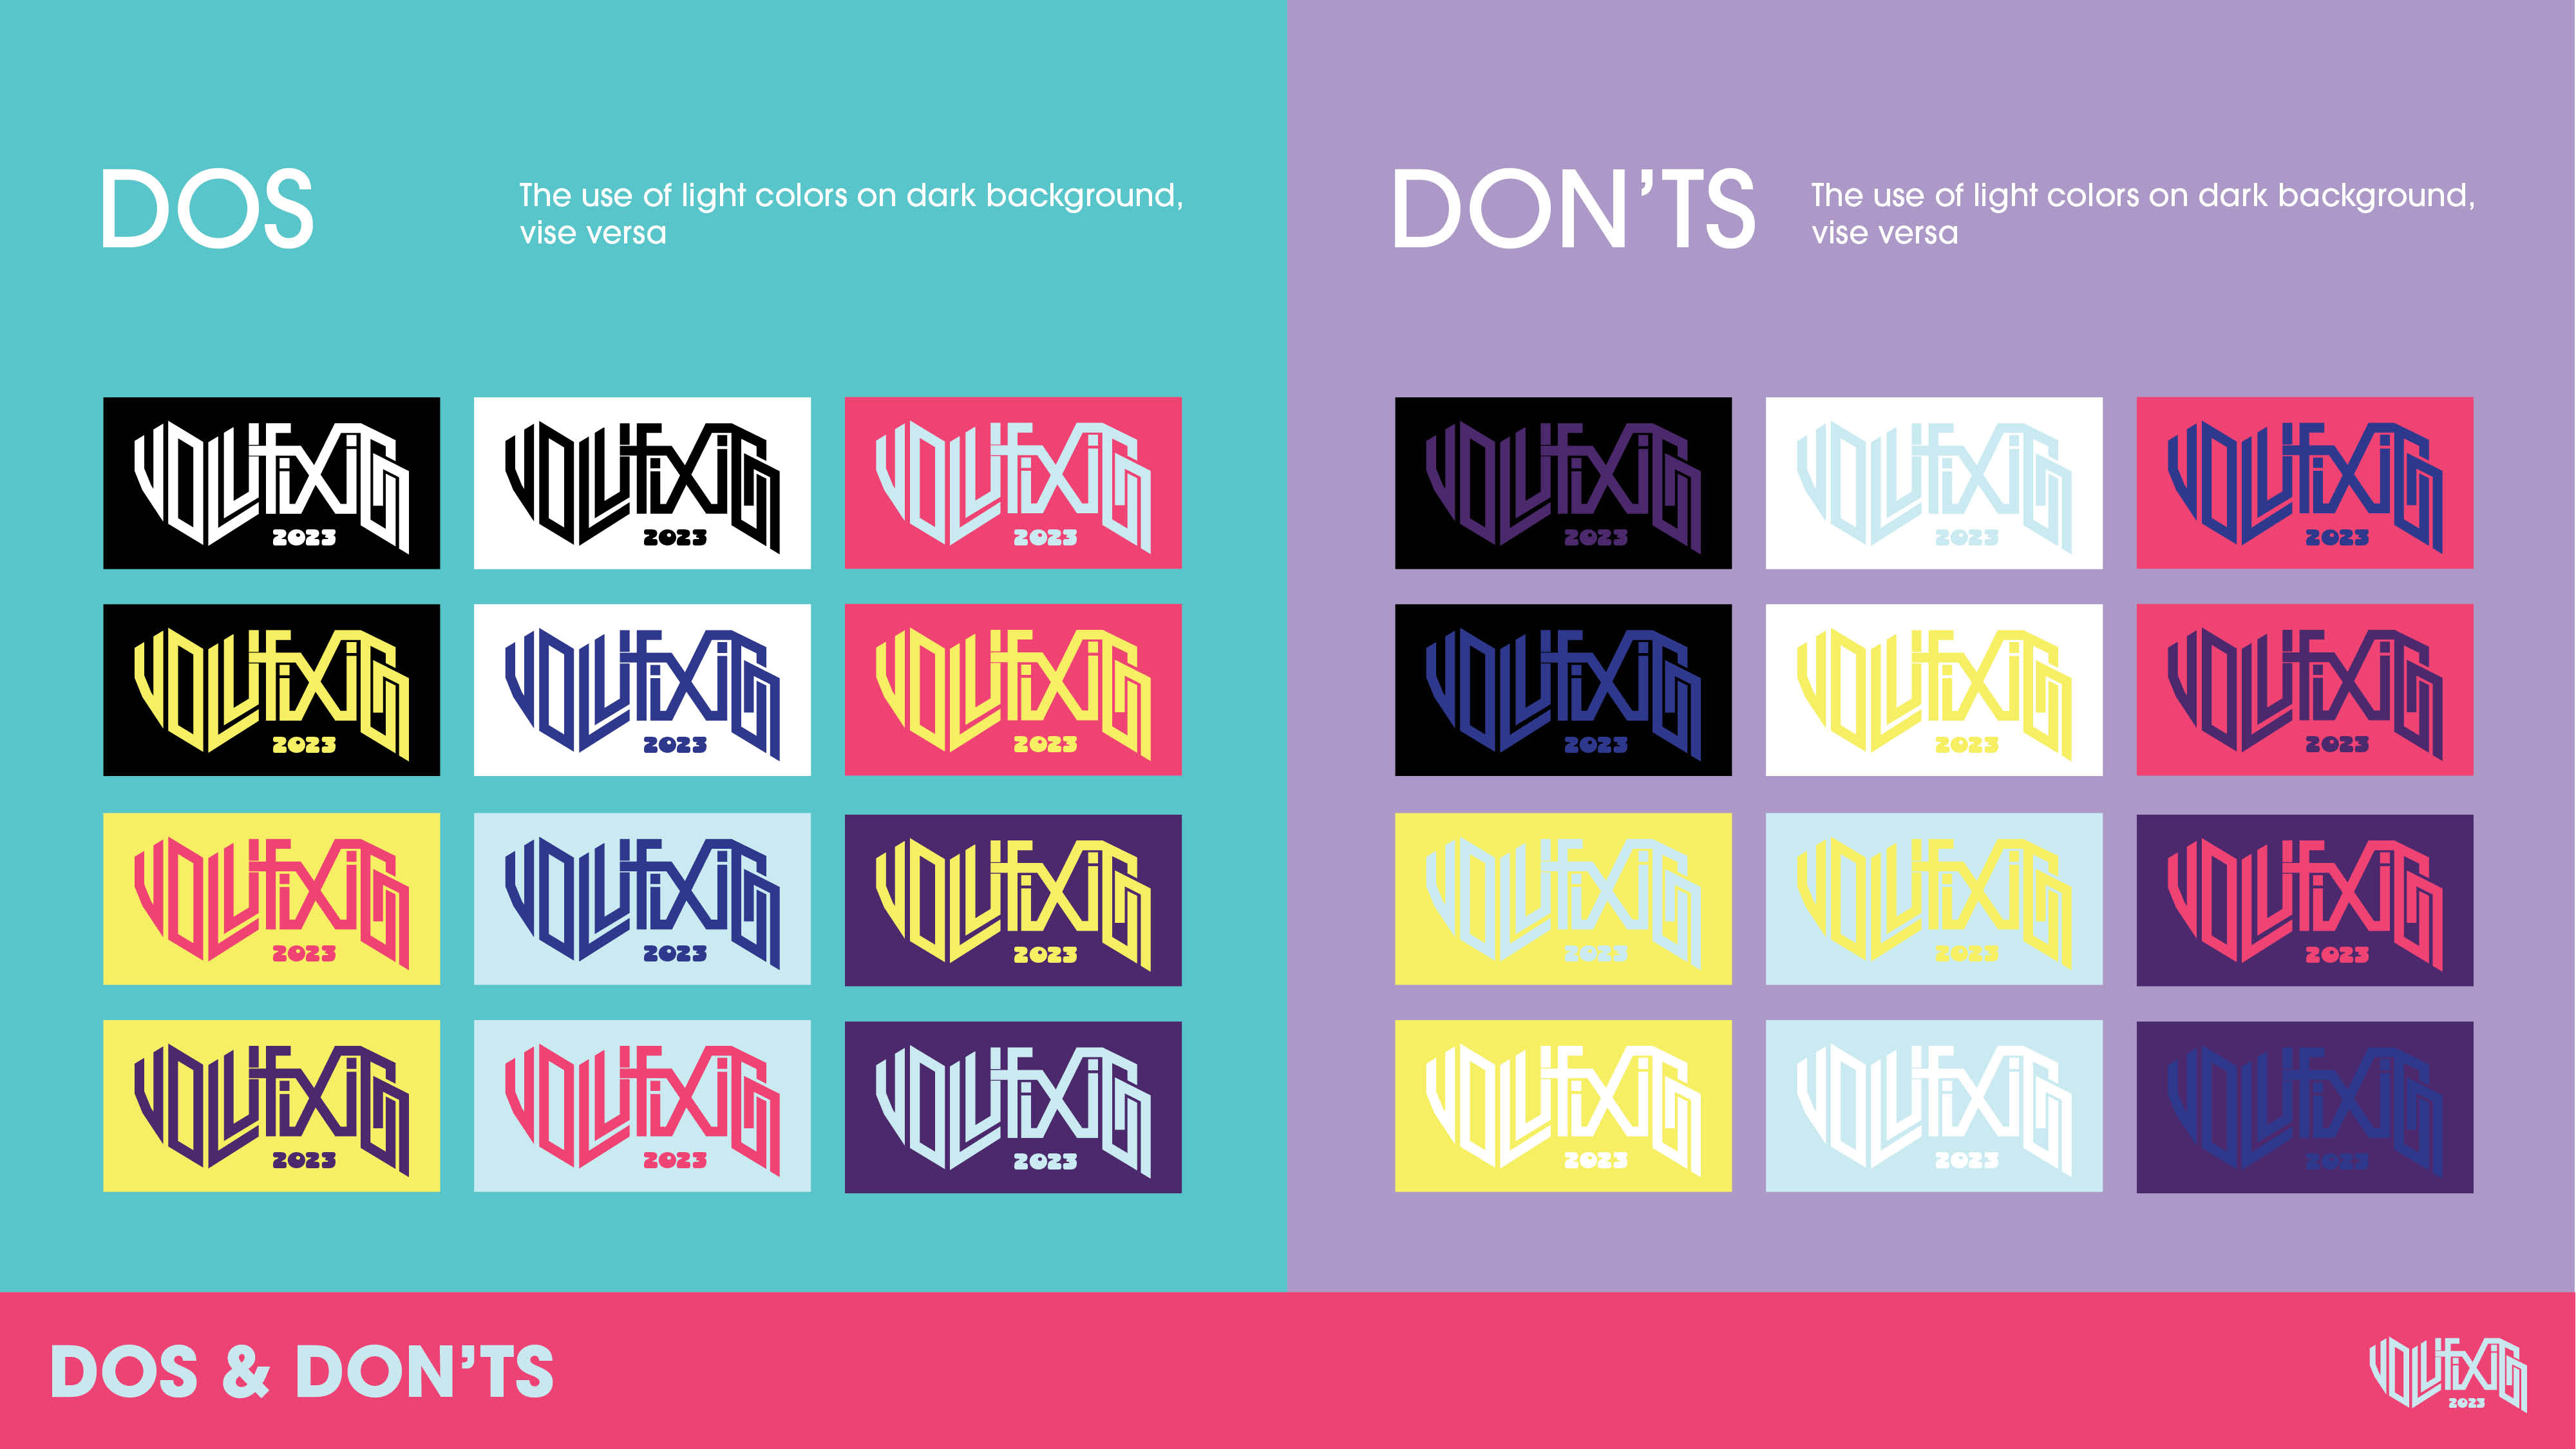 Volufixions logo color combinations (do and don's)